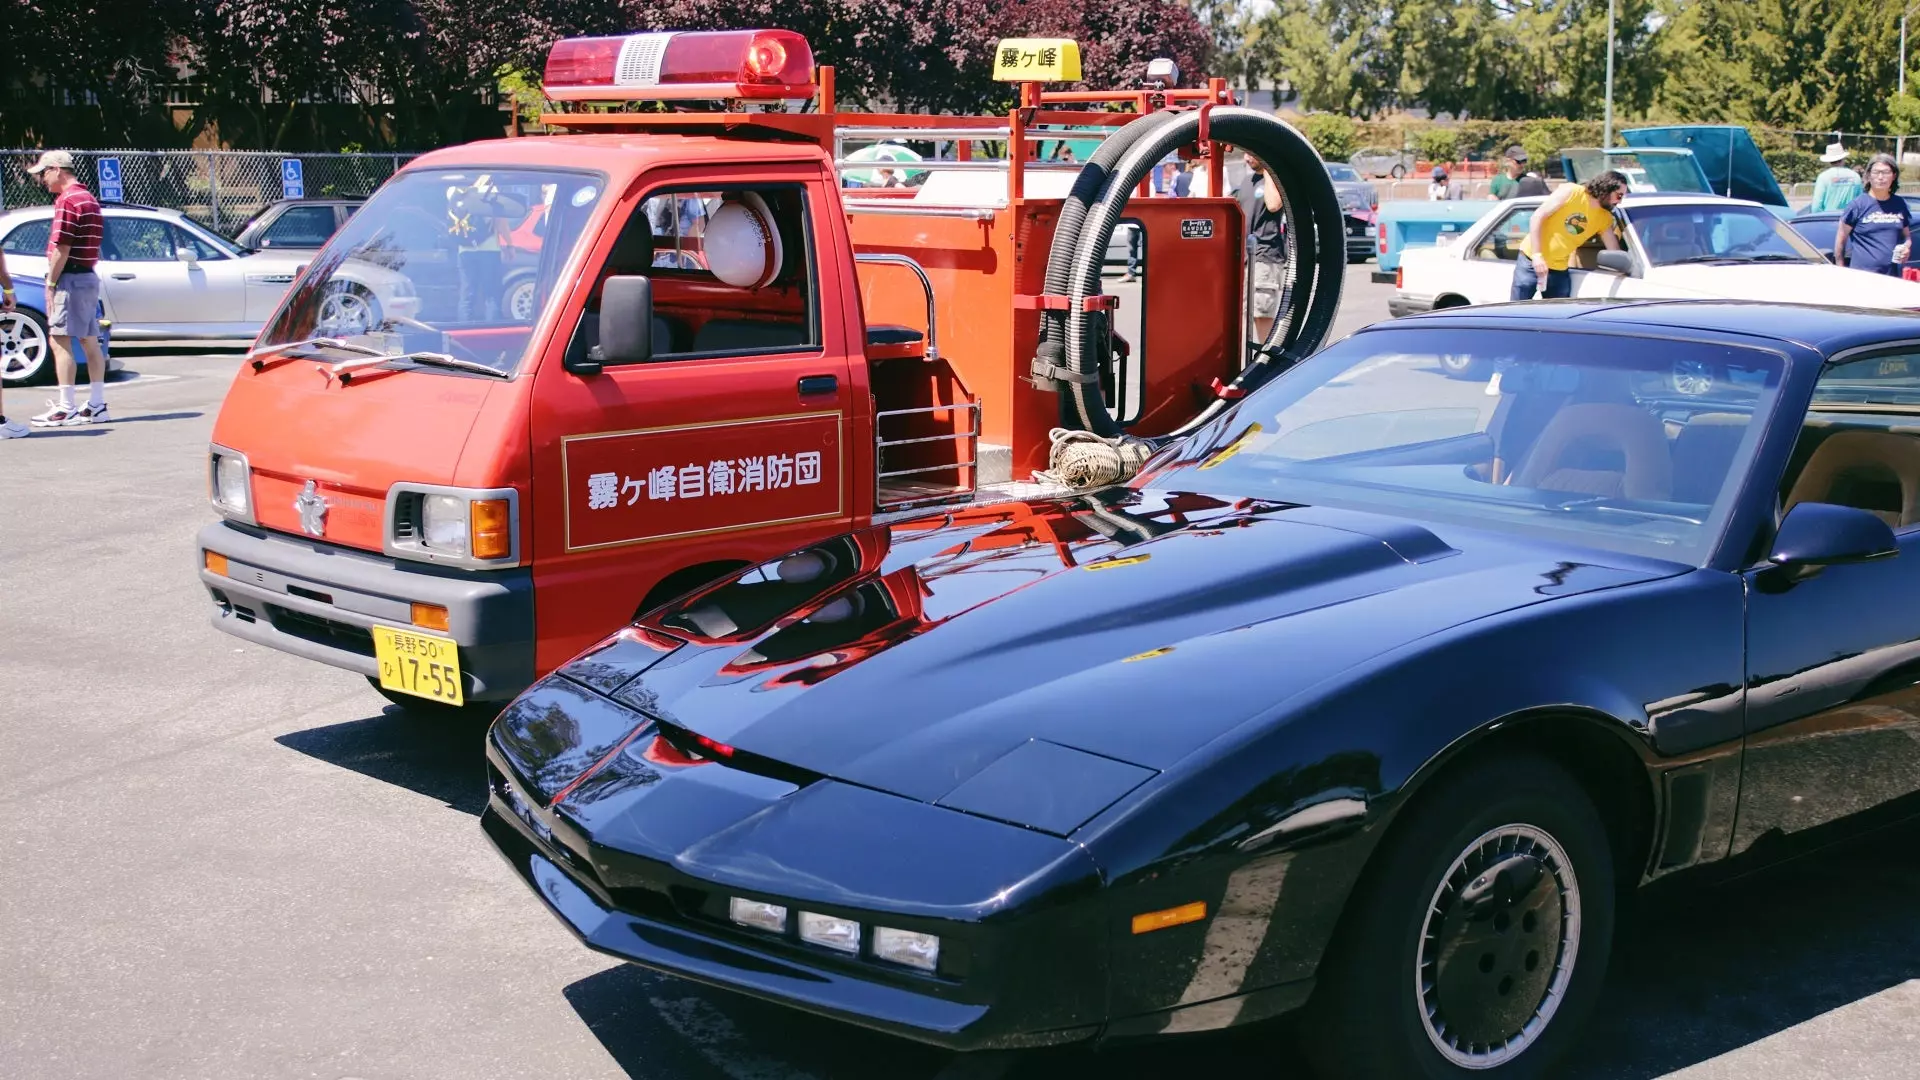 Who Knew KITT and a Japanese Fire Truck Could Be Fast Friends? | Autance